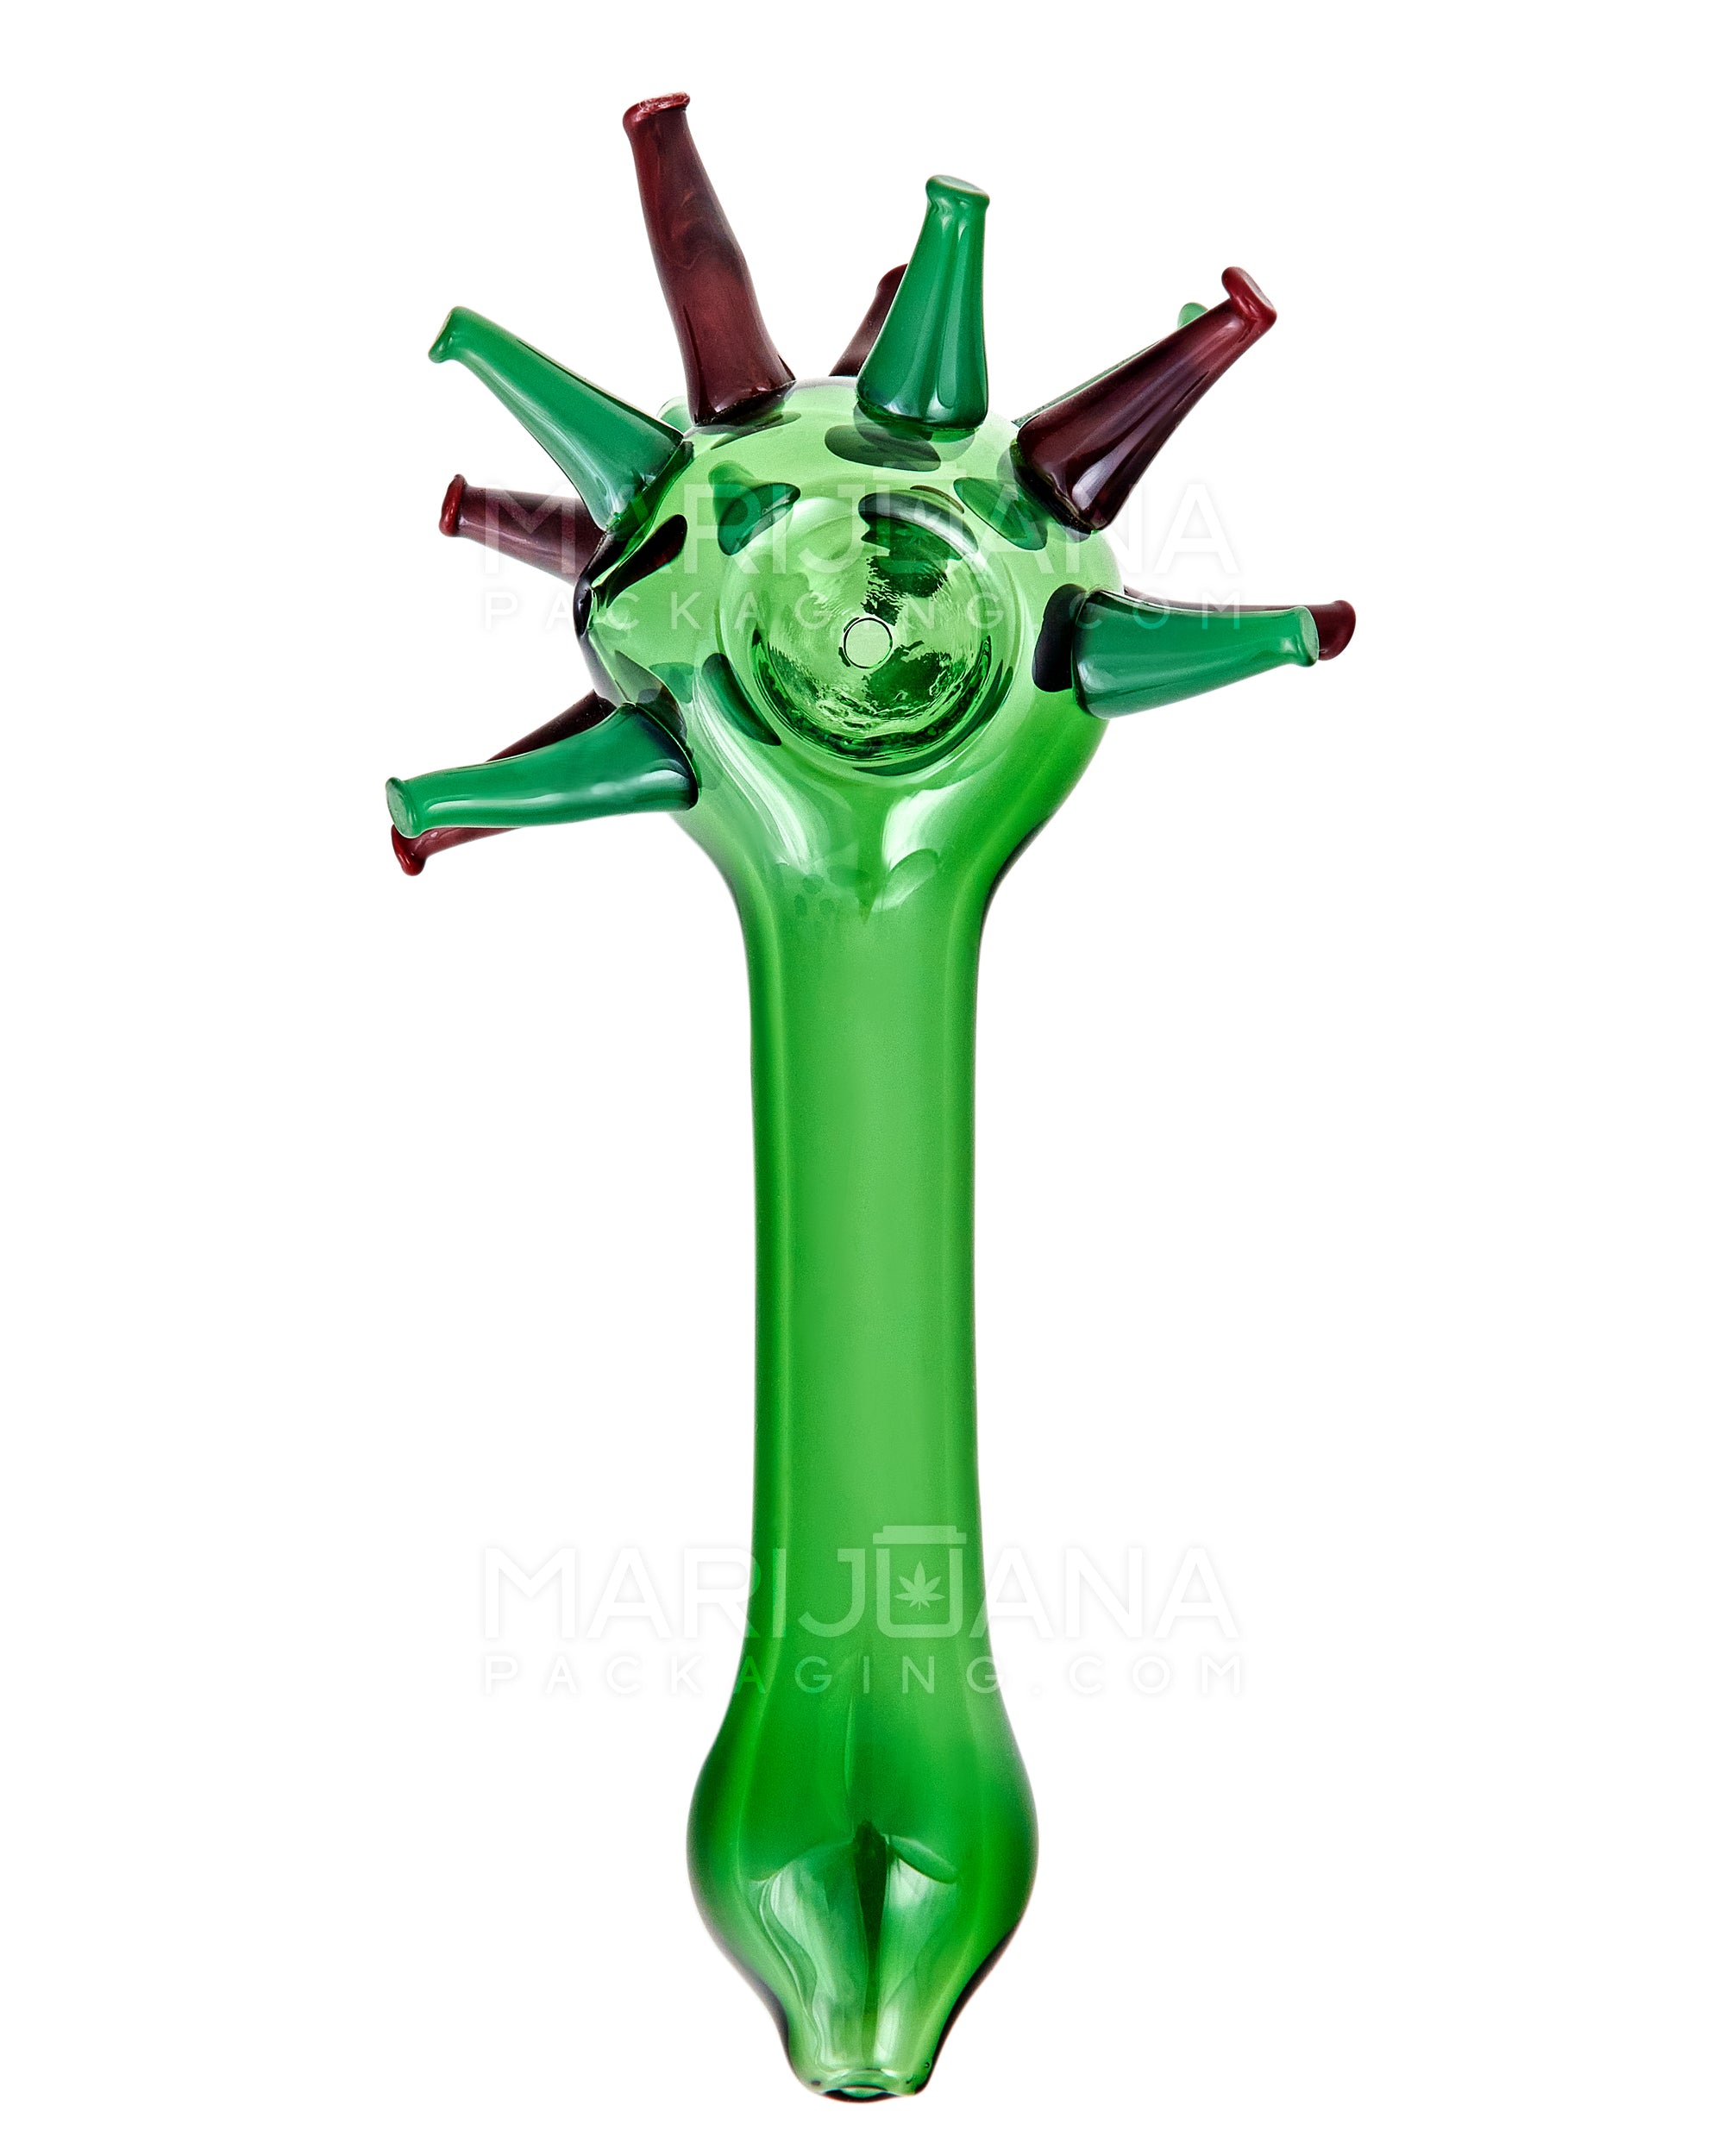 Spiked Ball Explosion Spoon Hand Pipe | 6in Long - Glass - Green - 2